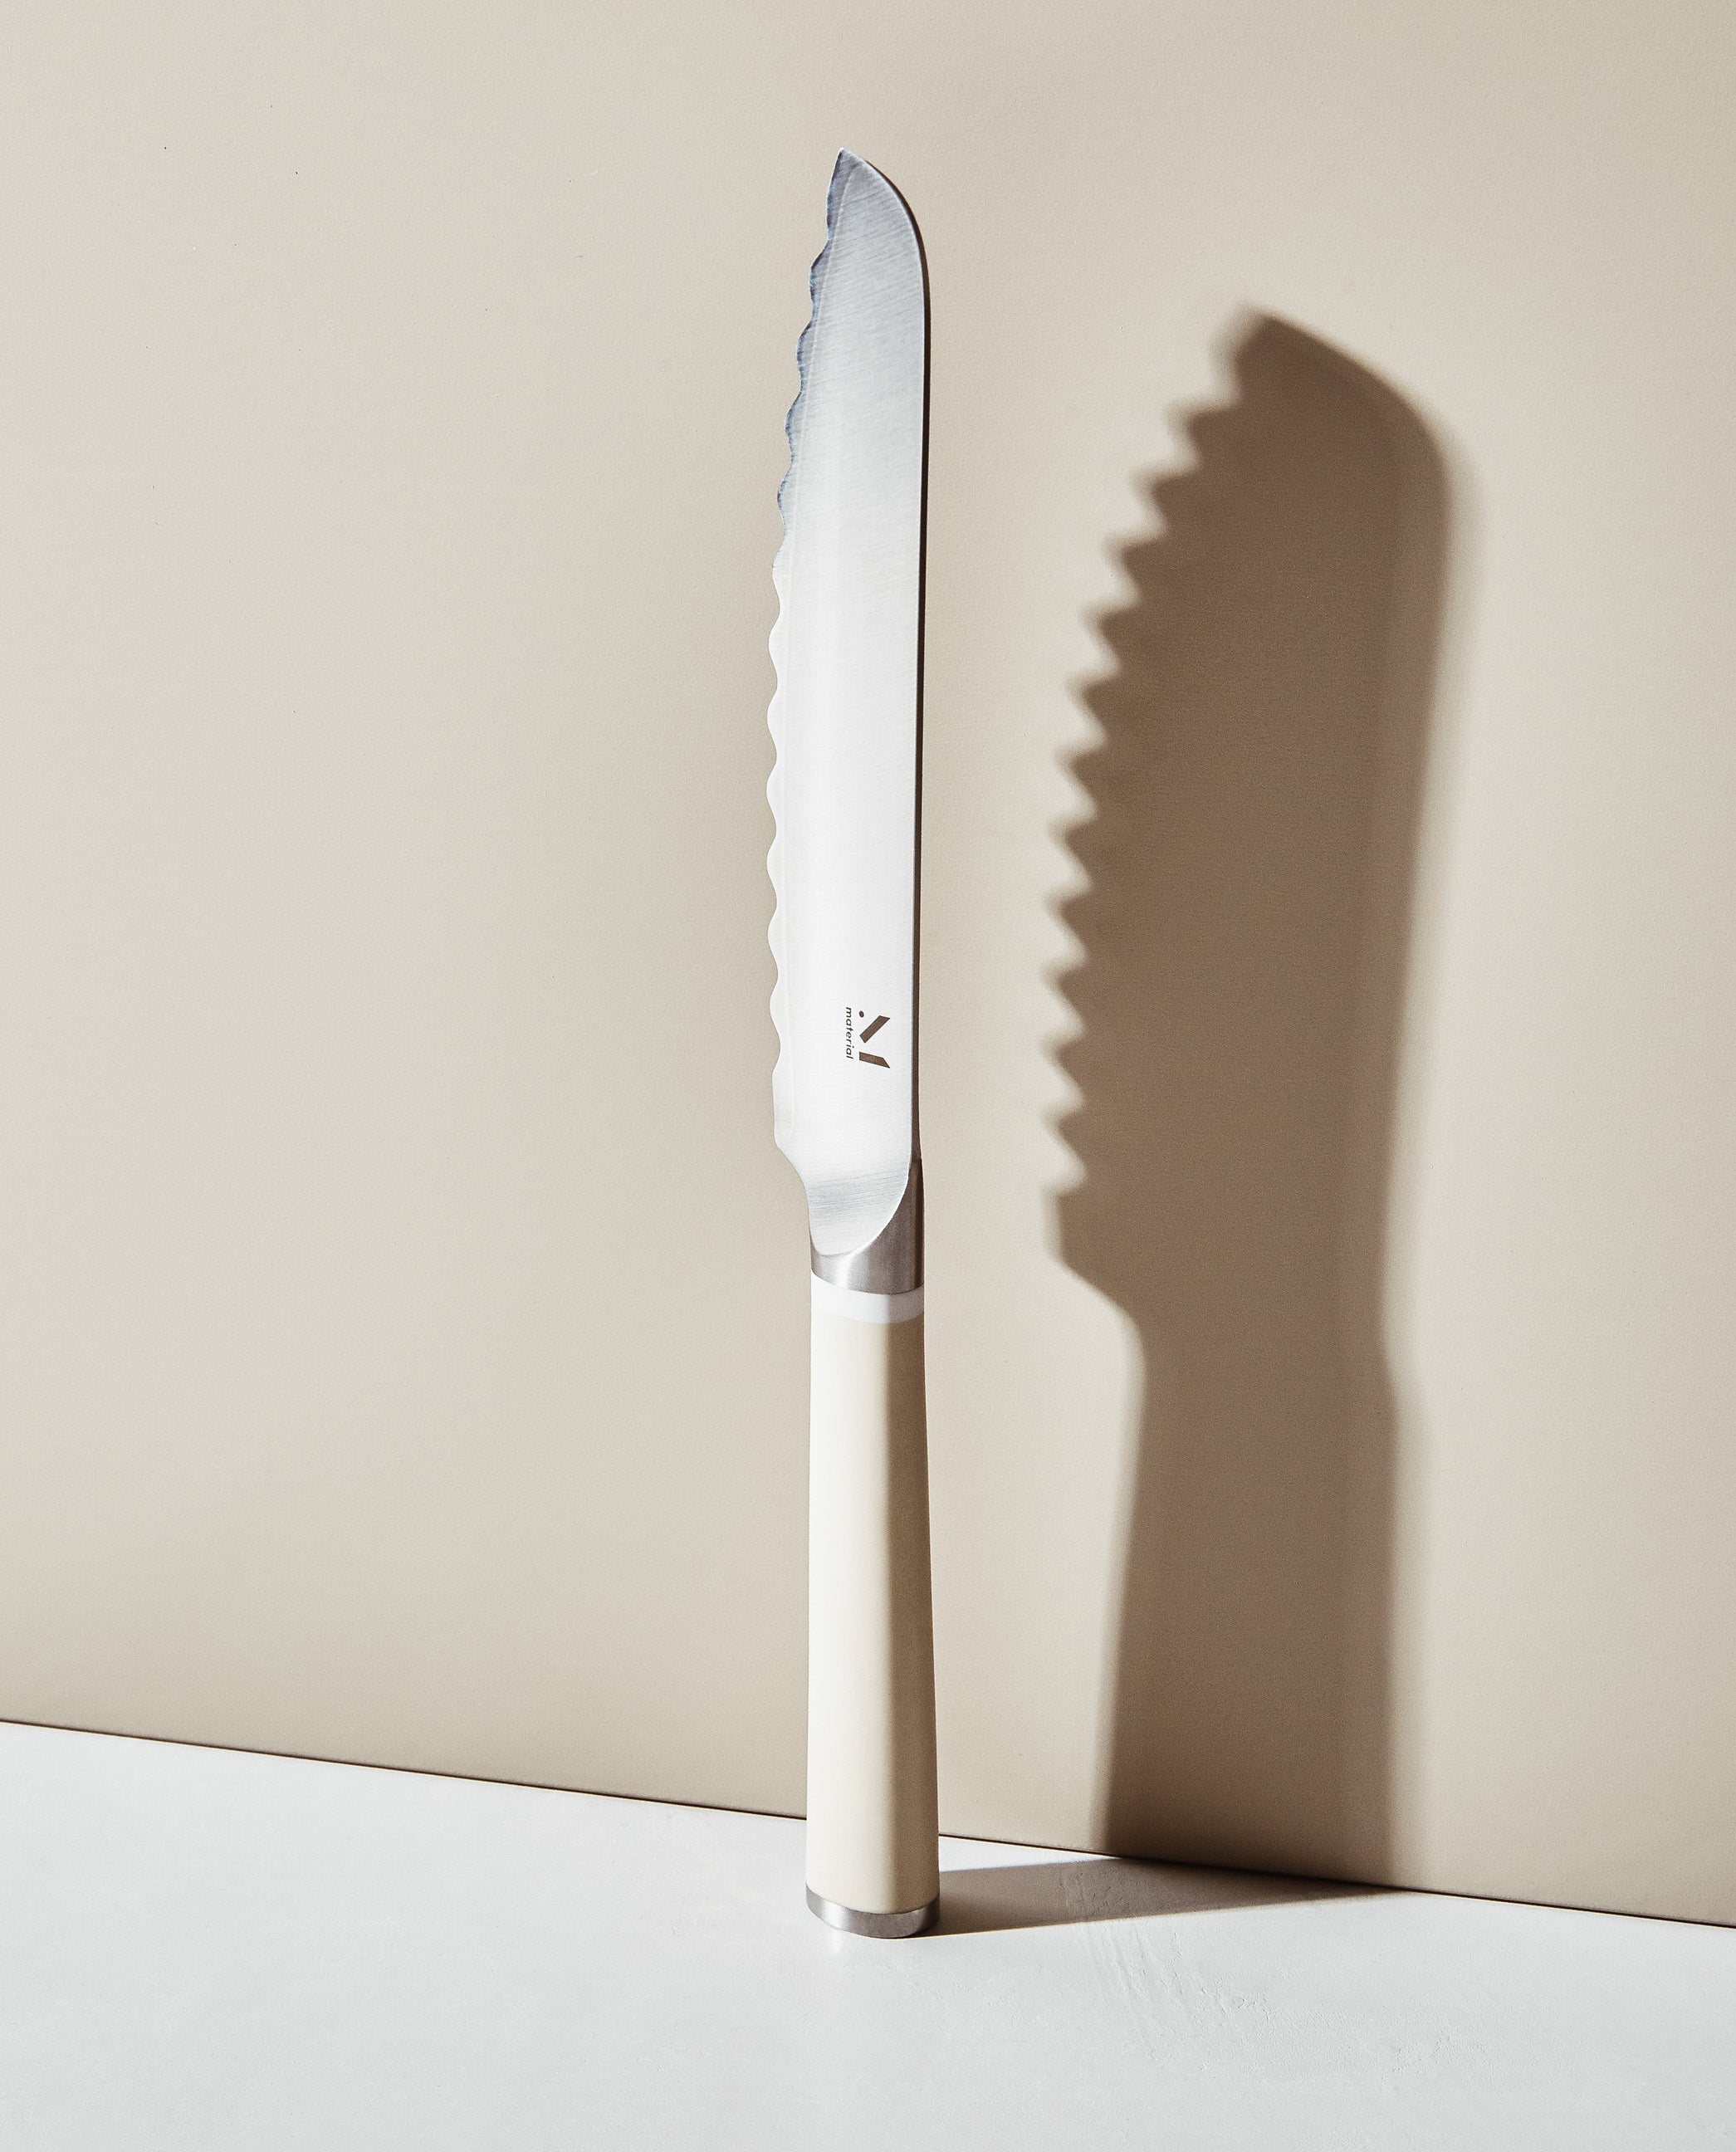 The Knives: Thoughtfully Designed, Affordably Priced